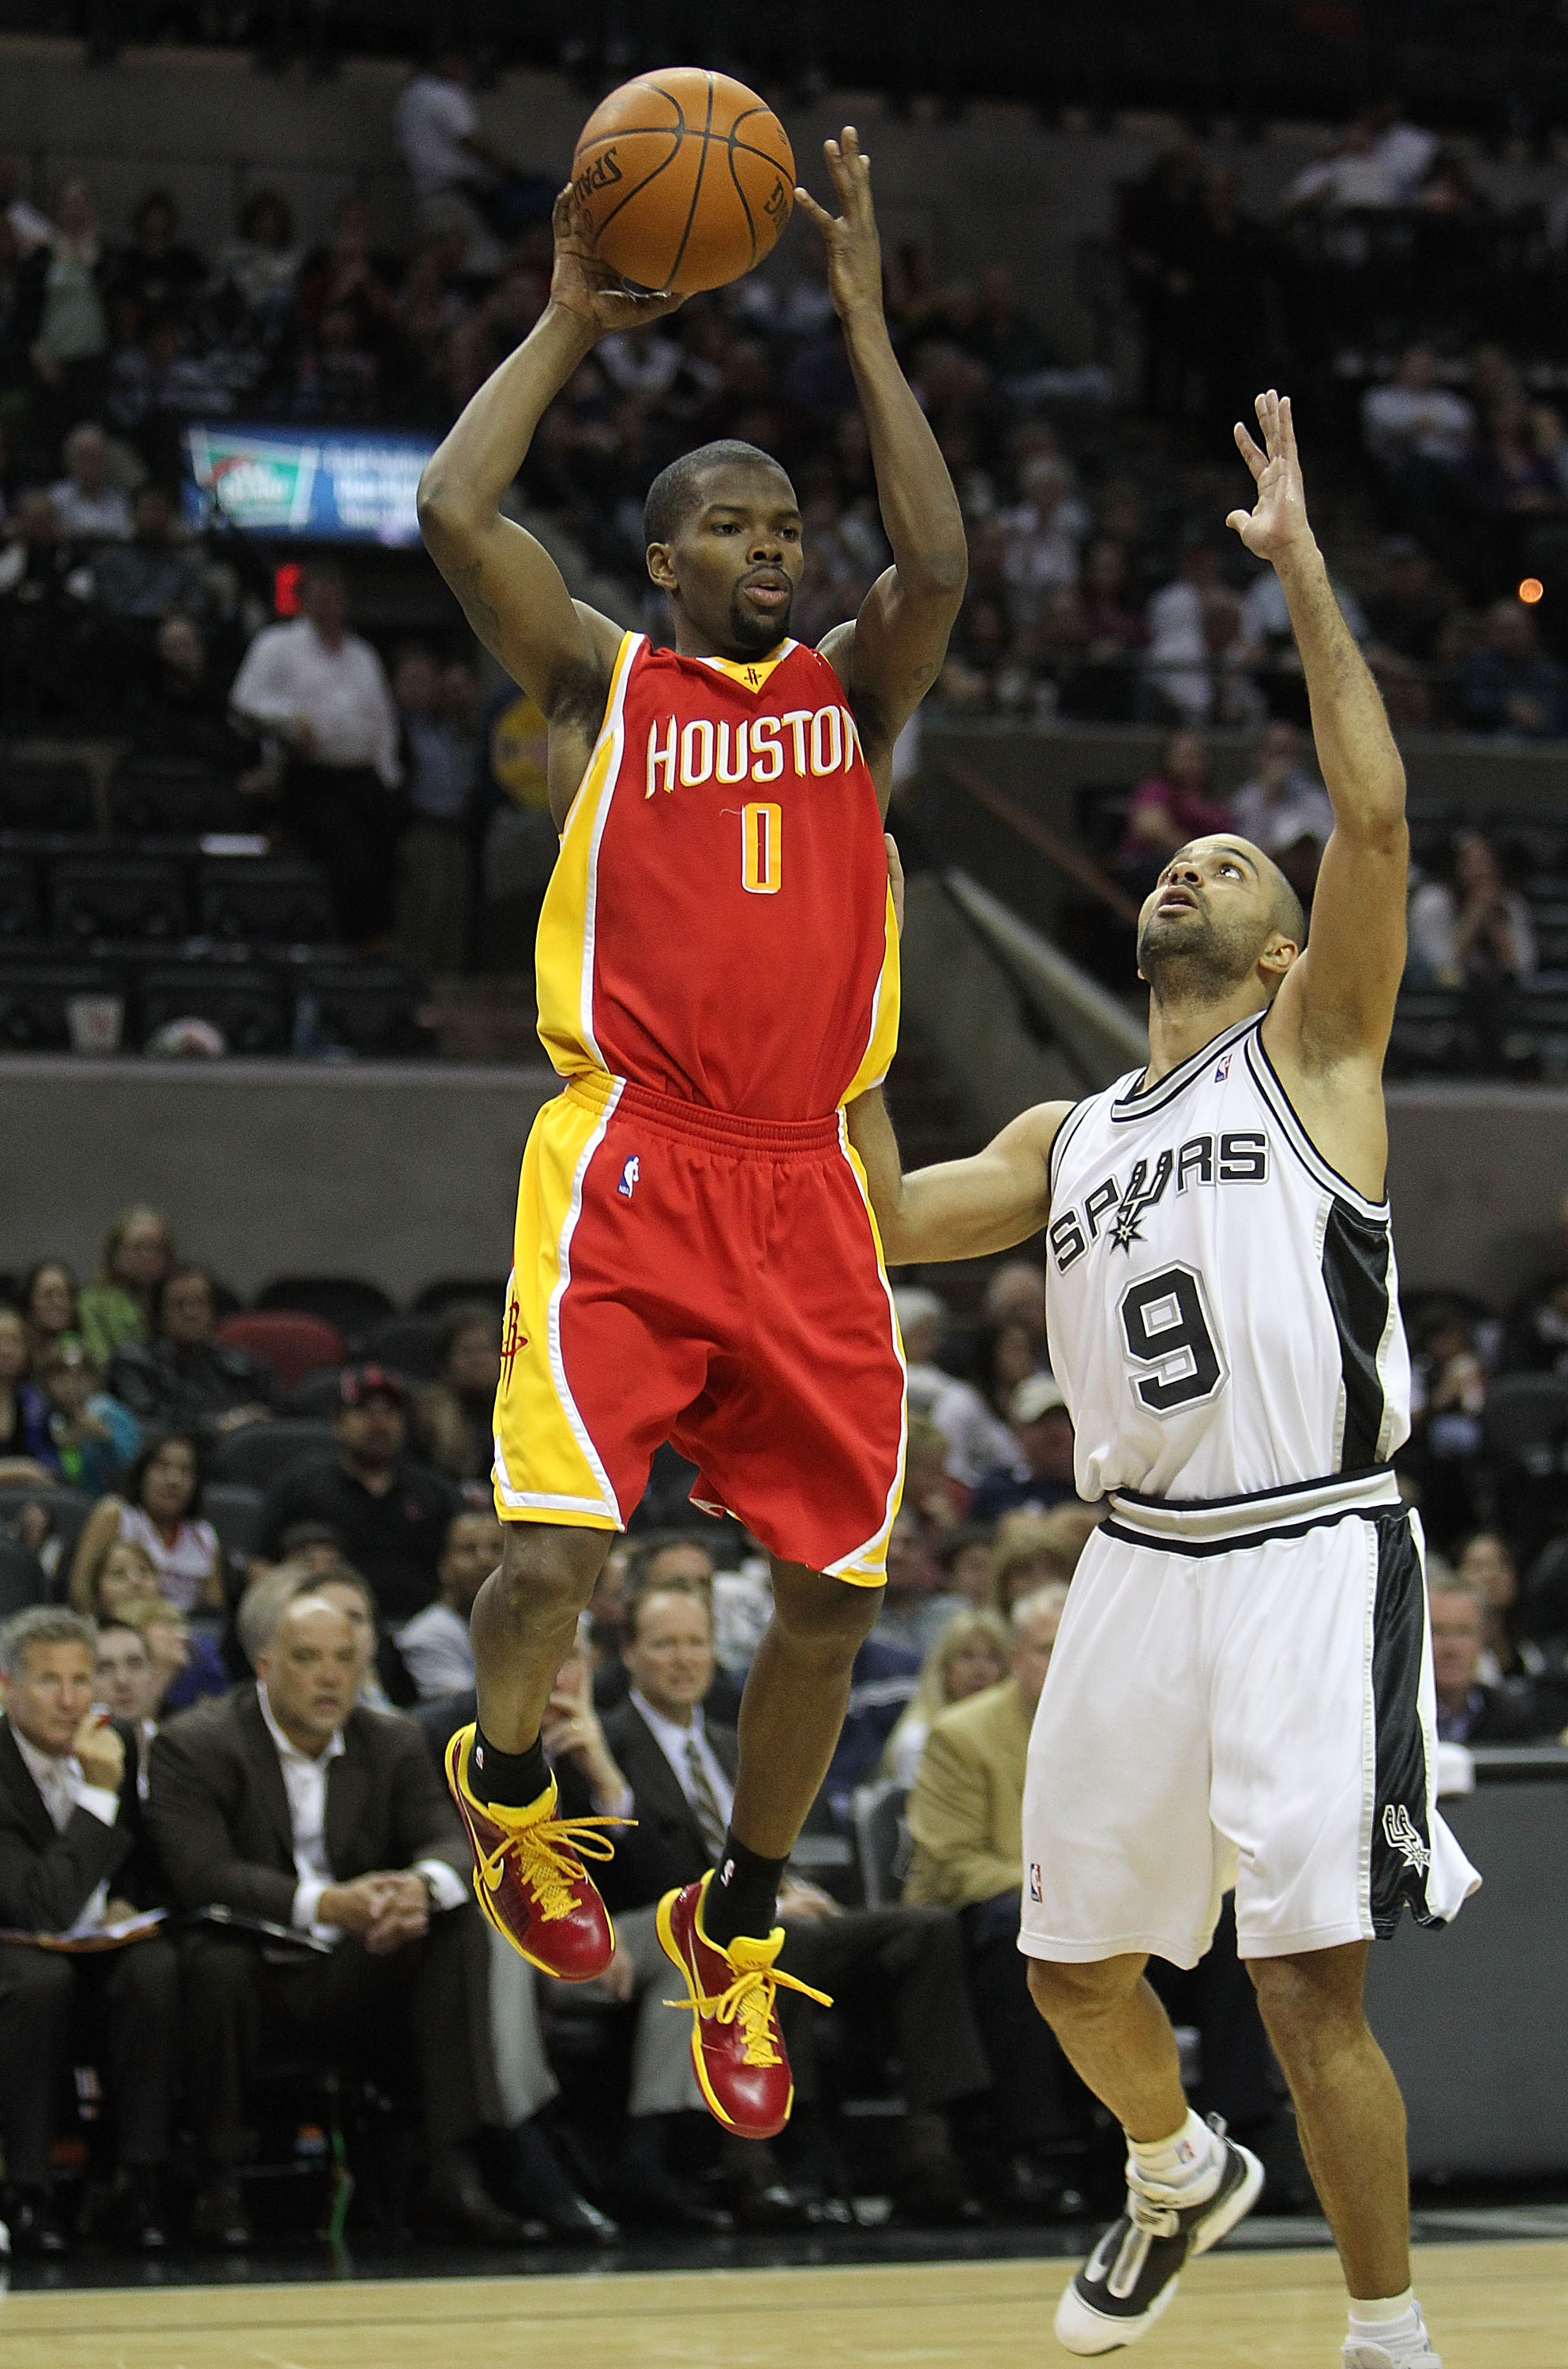 SAN ANTONIO - JANUARY 22:  Guard Aaron Brooks #0 of the Houston Rockets takes a shot against Tony Parker #9 of the San Antonio Spurs at AT&T Center on January 22, 2010 in San Antonio, Texas. NOTE TO USER: User expressly acknowledges and agrees that, by do